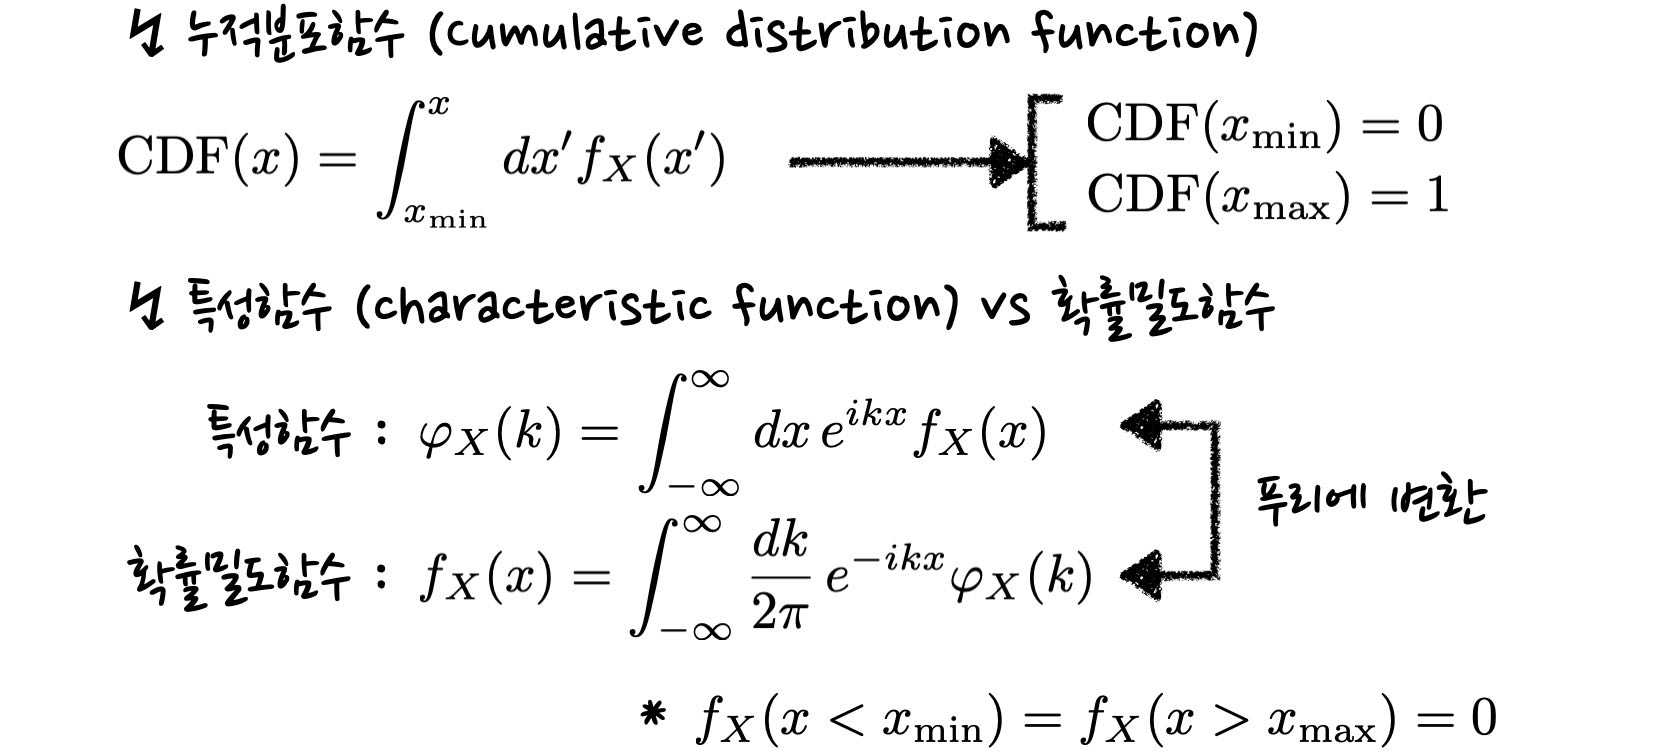 formulae for cumulative distribution function and characteristic function of given probability distribution function.